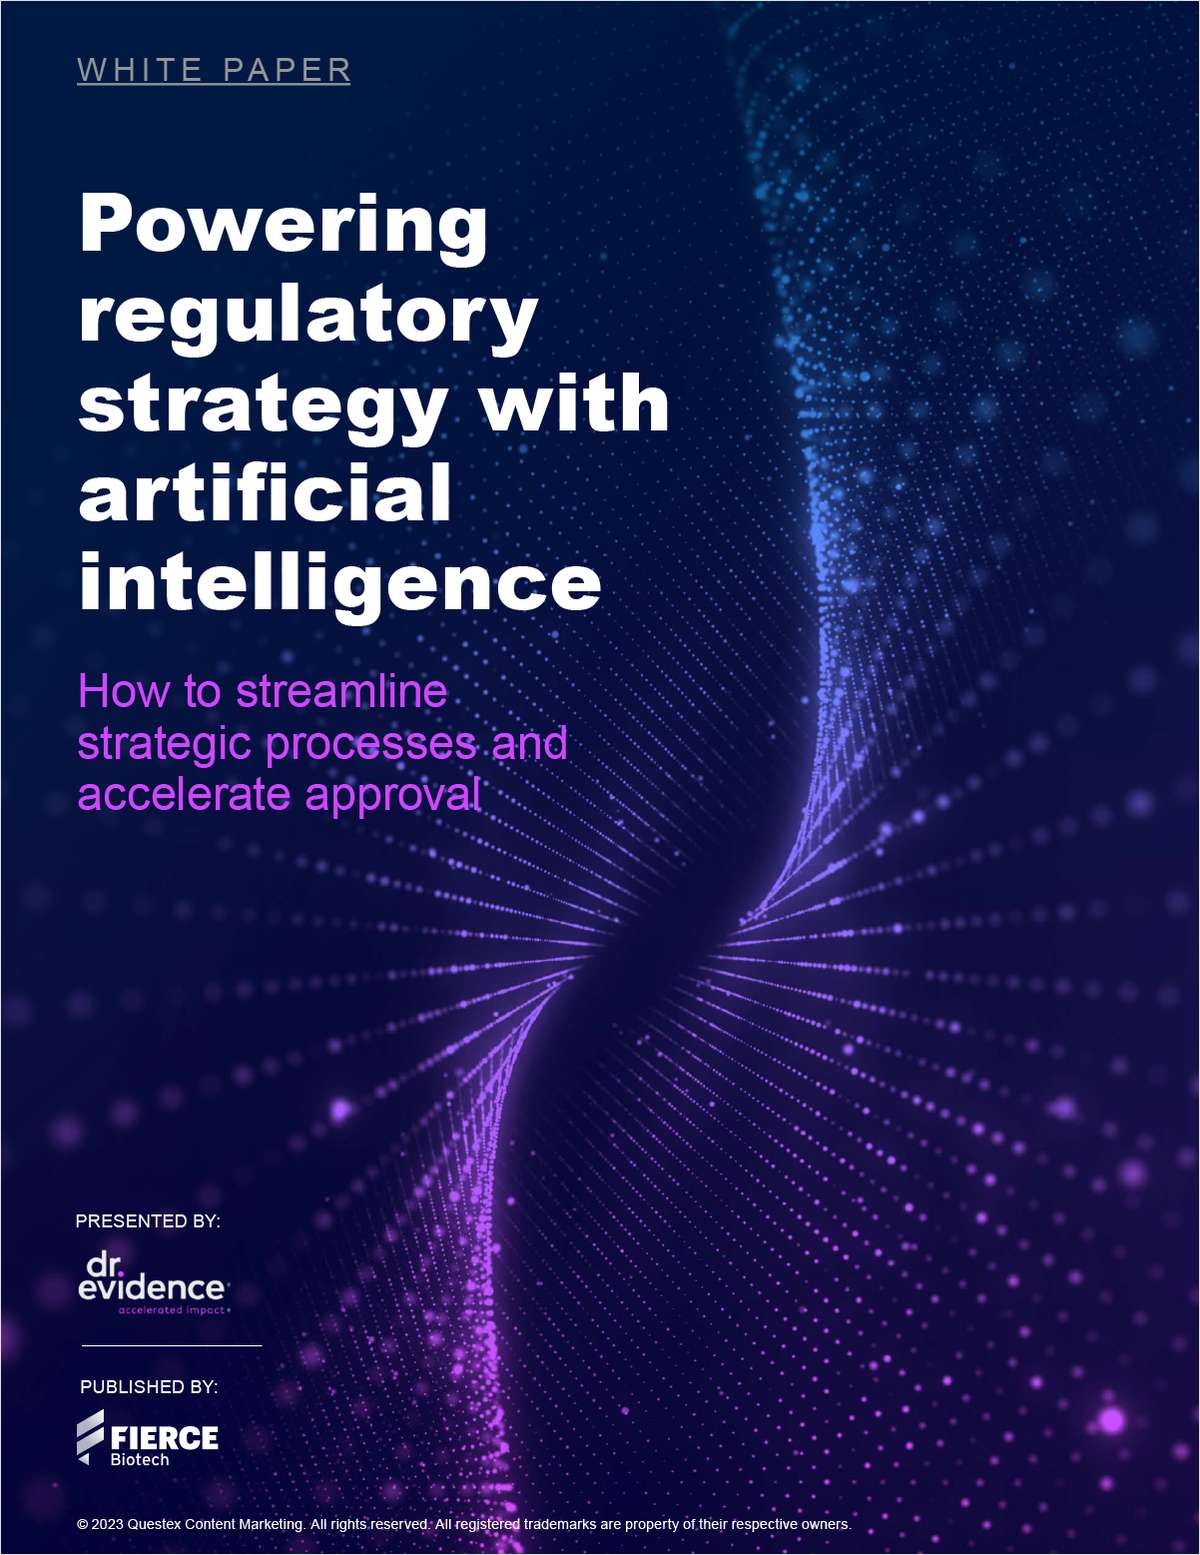 Powering Regulatory Strategy With Artificial Intelligence: How to Streamline Strategic Processes and Accelerate Approval